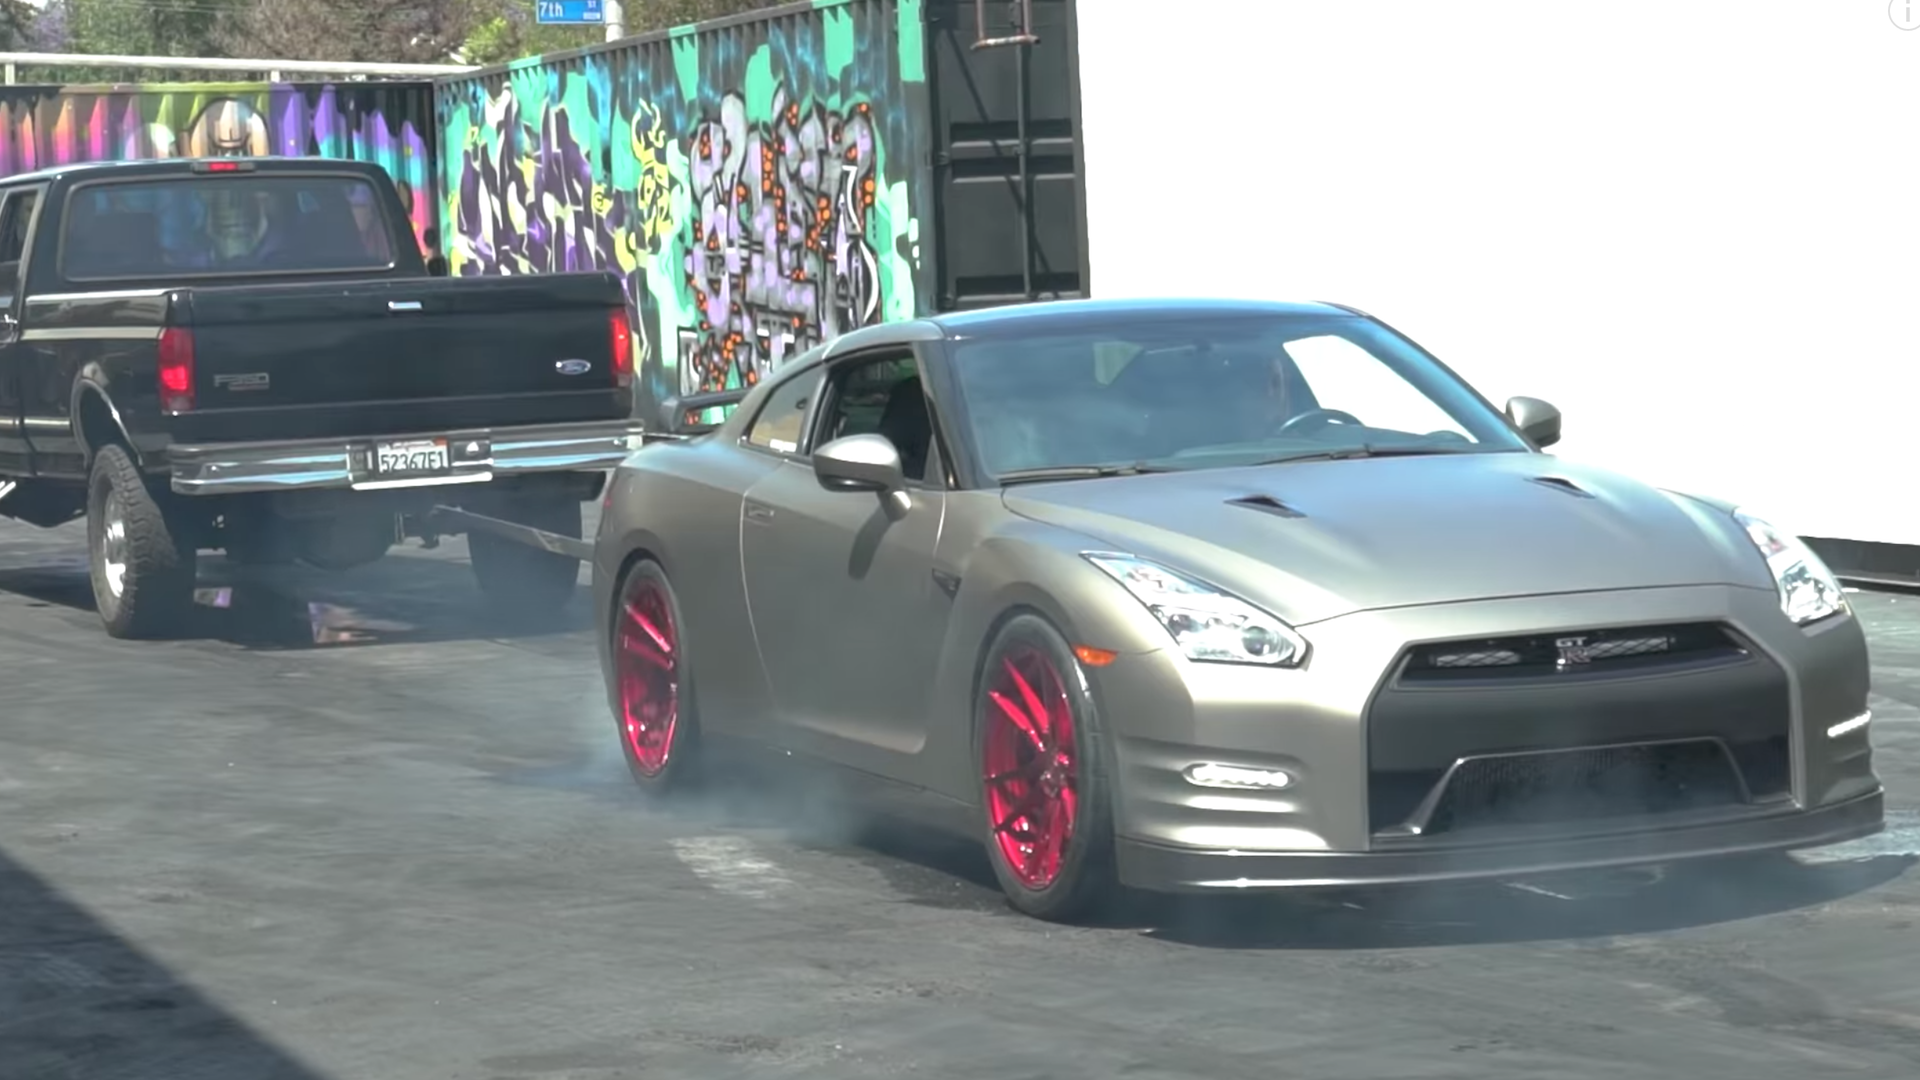 Watch This 800-HP Nissan GT-R Smoke its Tires While Chained to a Truck